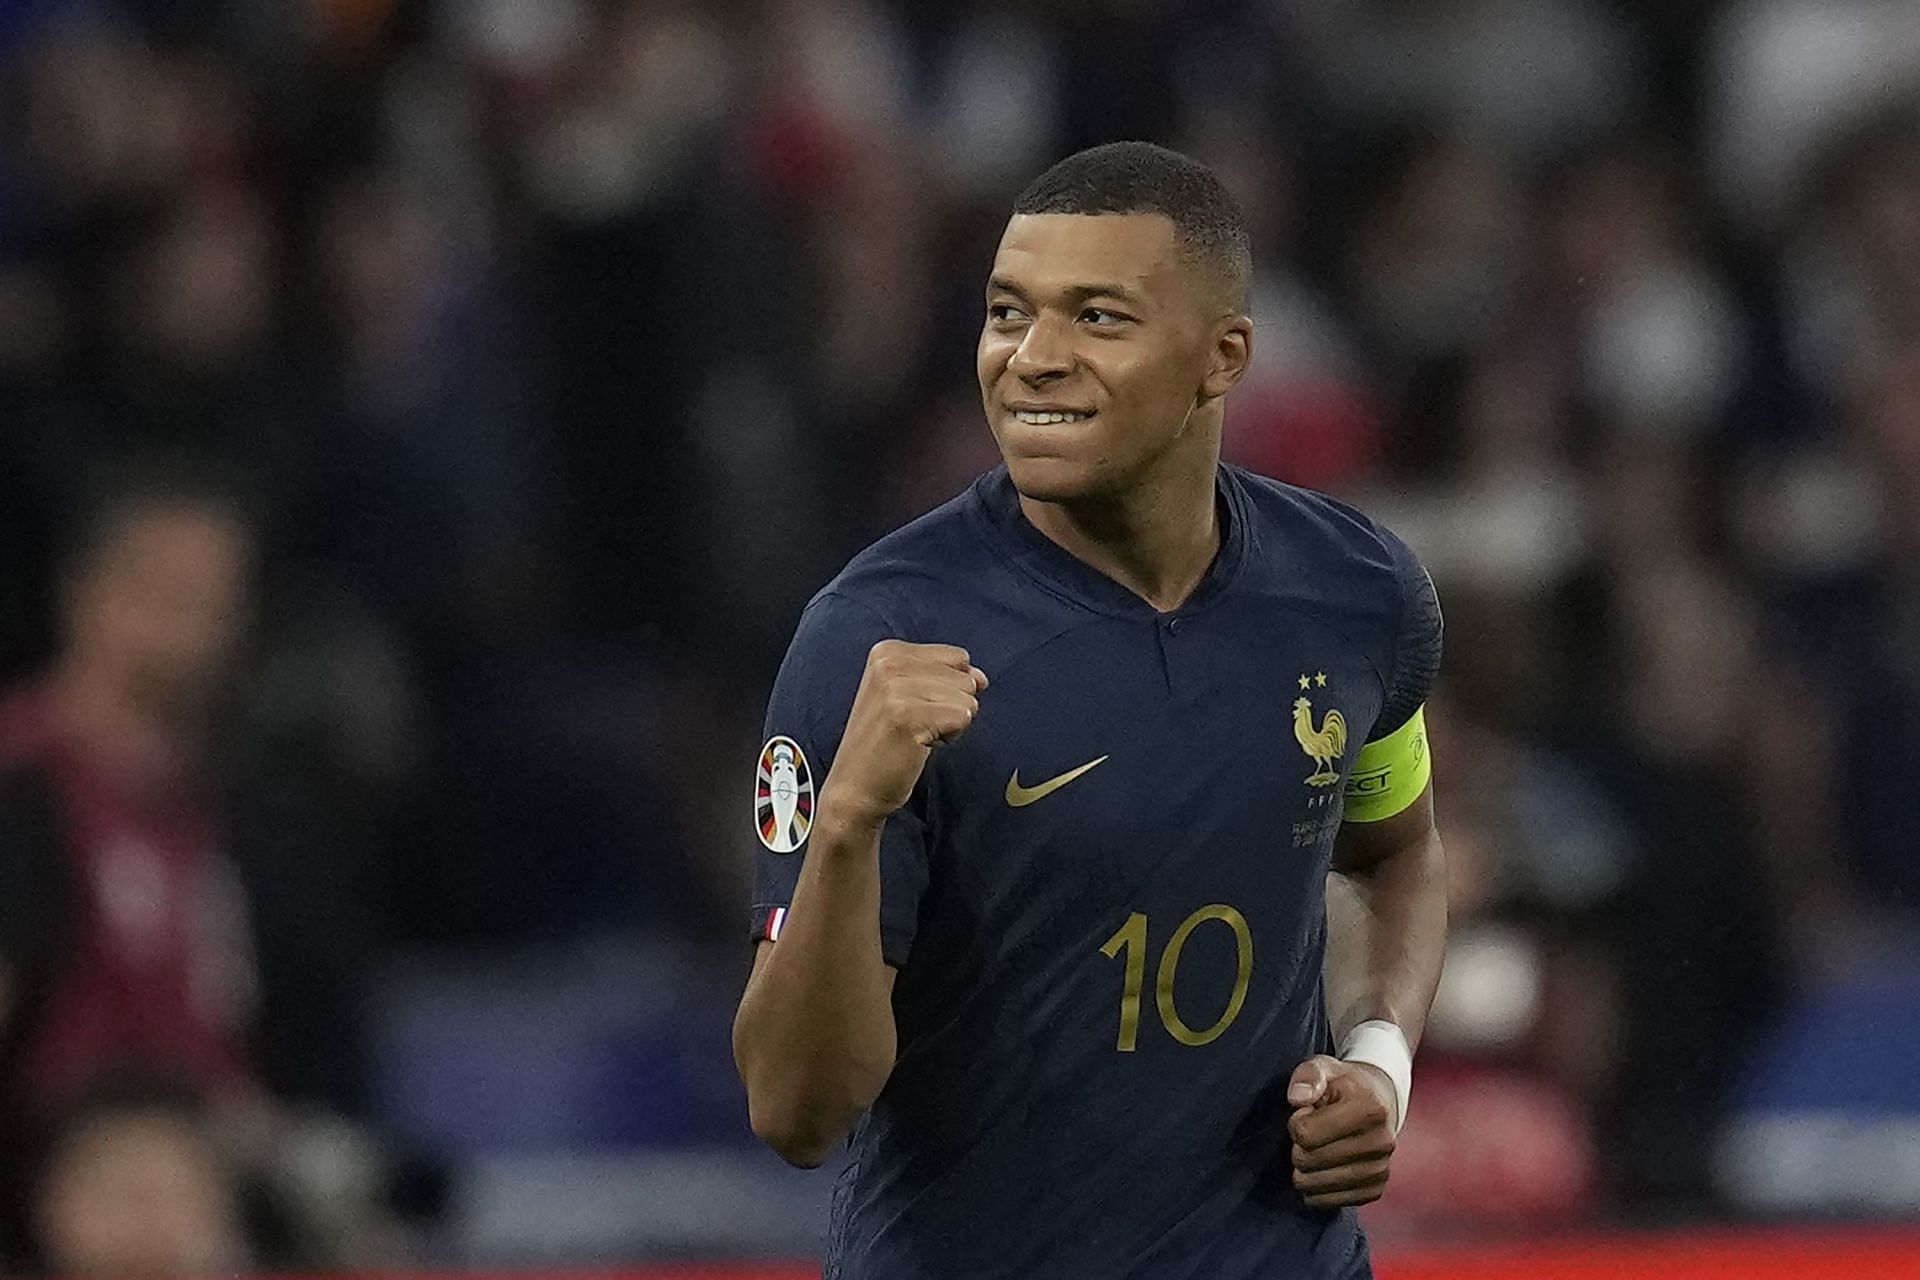 Kylian Mbappe has admirers at the Emirates.